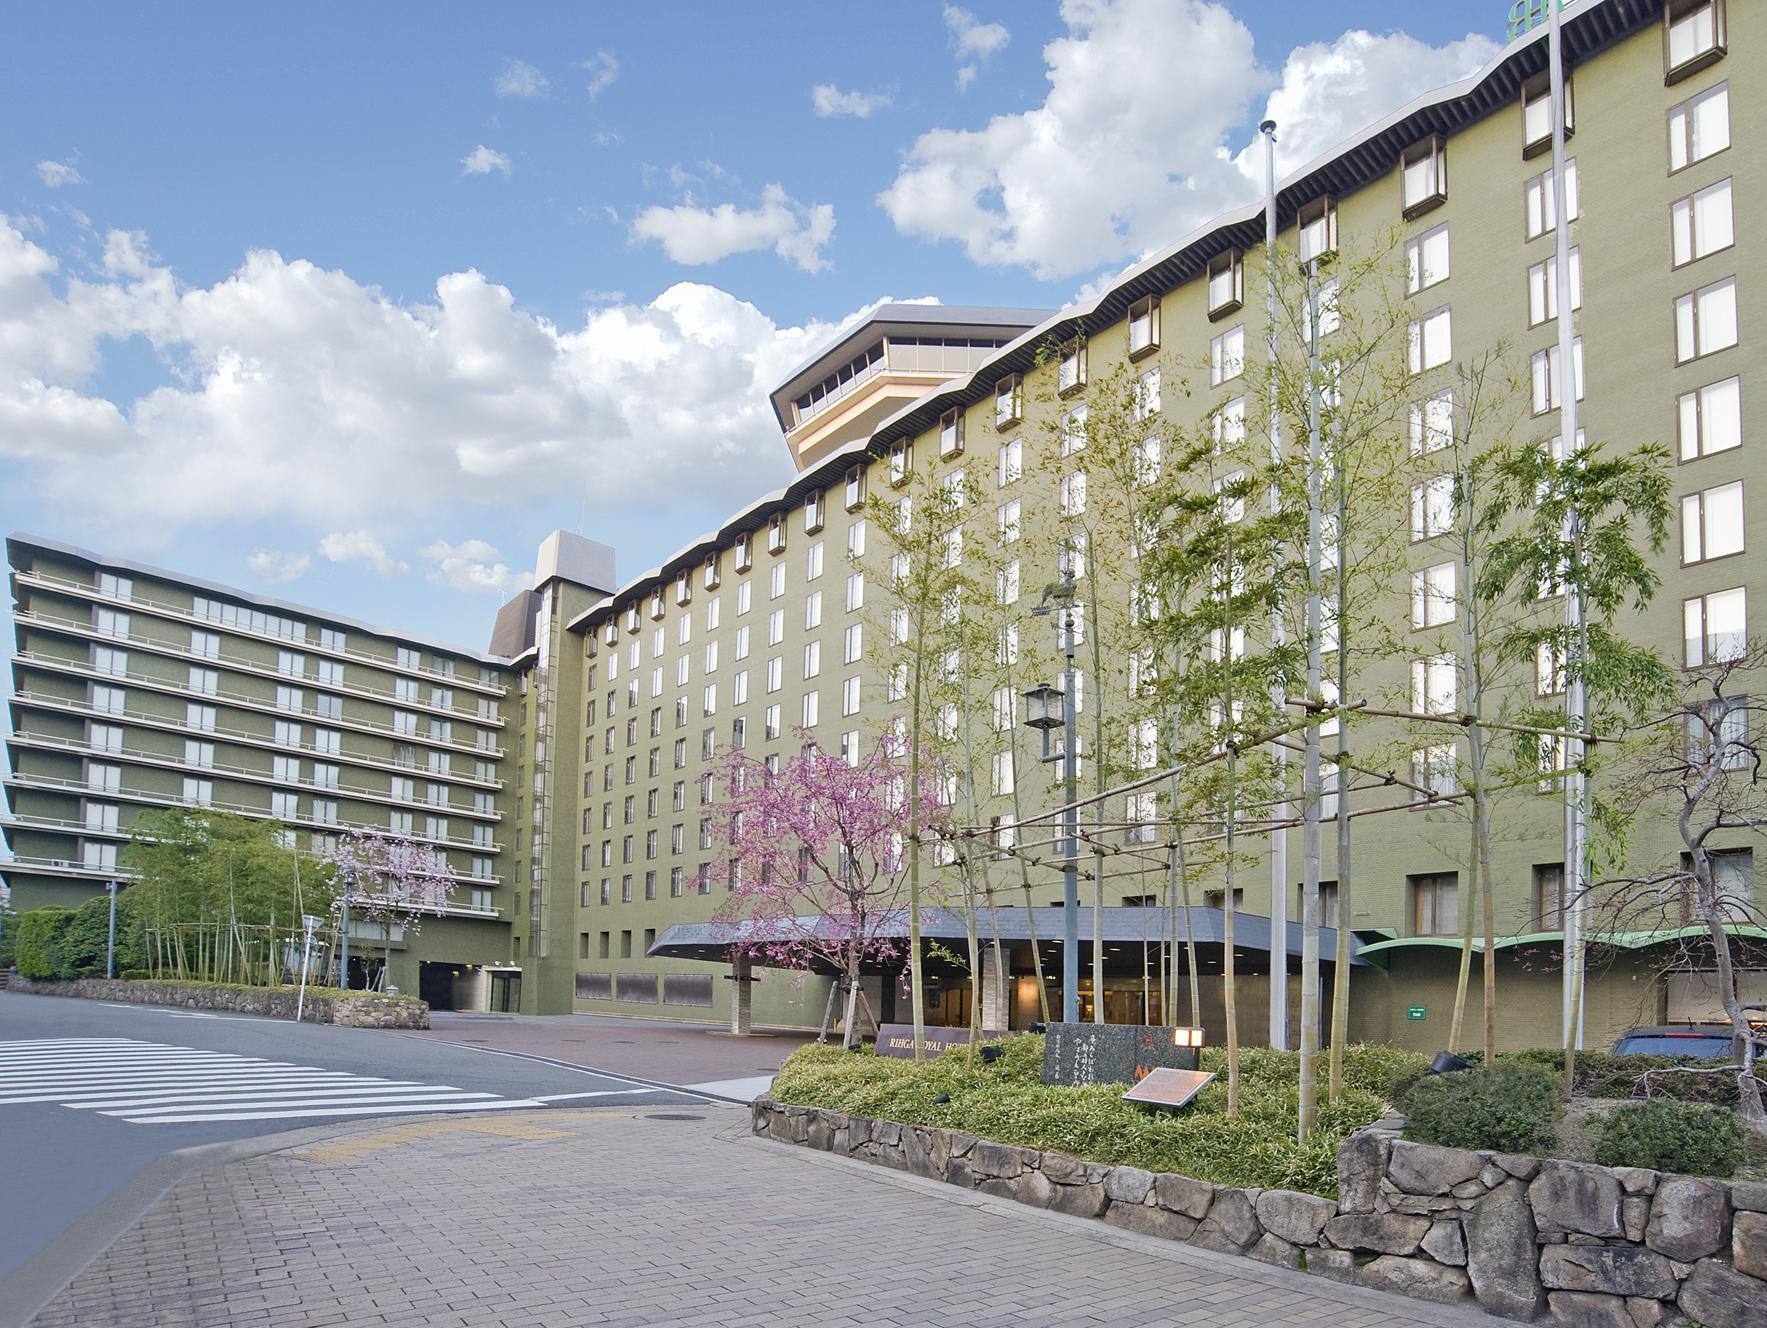 RIHGA Royal Hotel Kyoto Japan FAQ 2016, What facilities are there in RIHGA Royal Hotel Kyoto Japan 2016, What Languages Spoken are Supported in RIHGA Royal Hotel Kyoto Japan 2016, Which payment cards are accepted in RIHGA Royal Hotel Kyoto Japan , Japan RIHGA Royal Hotel Kyoto room facilities and services Q&A 2016, Japan RIHGA Royal Hotel Kyoto online booking services 2016, Japan RIHGA Royal Hotel Kyoto address 2016, Japan RIHGA Royal Hotel Kyoto telephone number 2016,Japan RIHGA Royal Hotel Kyoto map 2016, Japan RIHGA Royal Hotel Kyoto traffic guide 2016, how to go Japan RIHGA Royal Hotel Kyoto, Japan RIHGA Royal Hotel Kyoto booking online 2016, Japan RIHGA Royal Hotel Kyoto room types 2016.